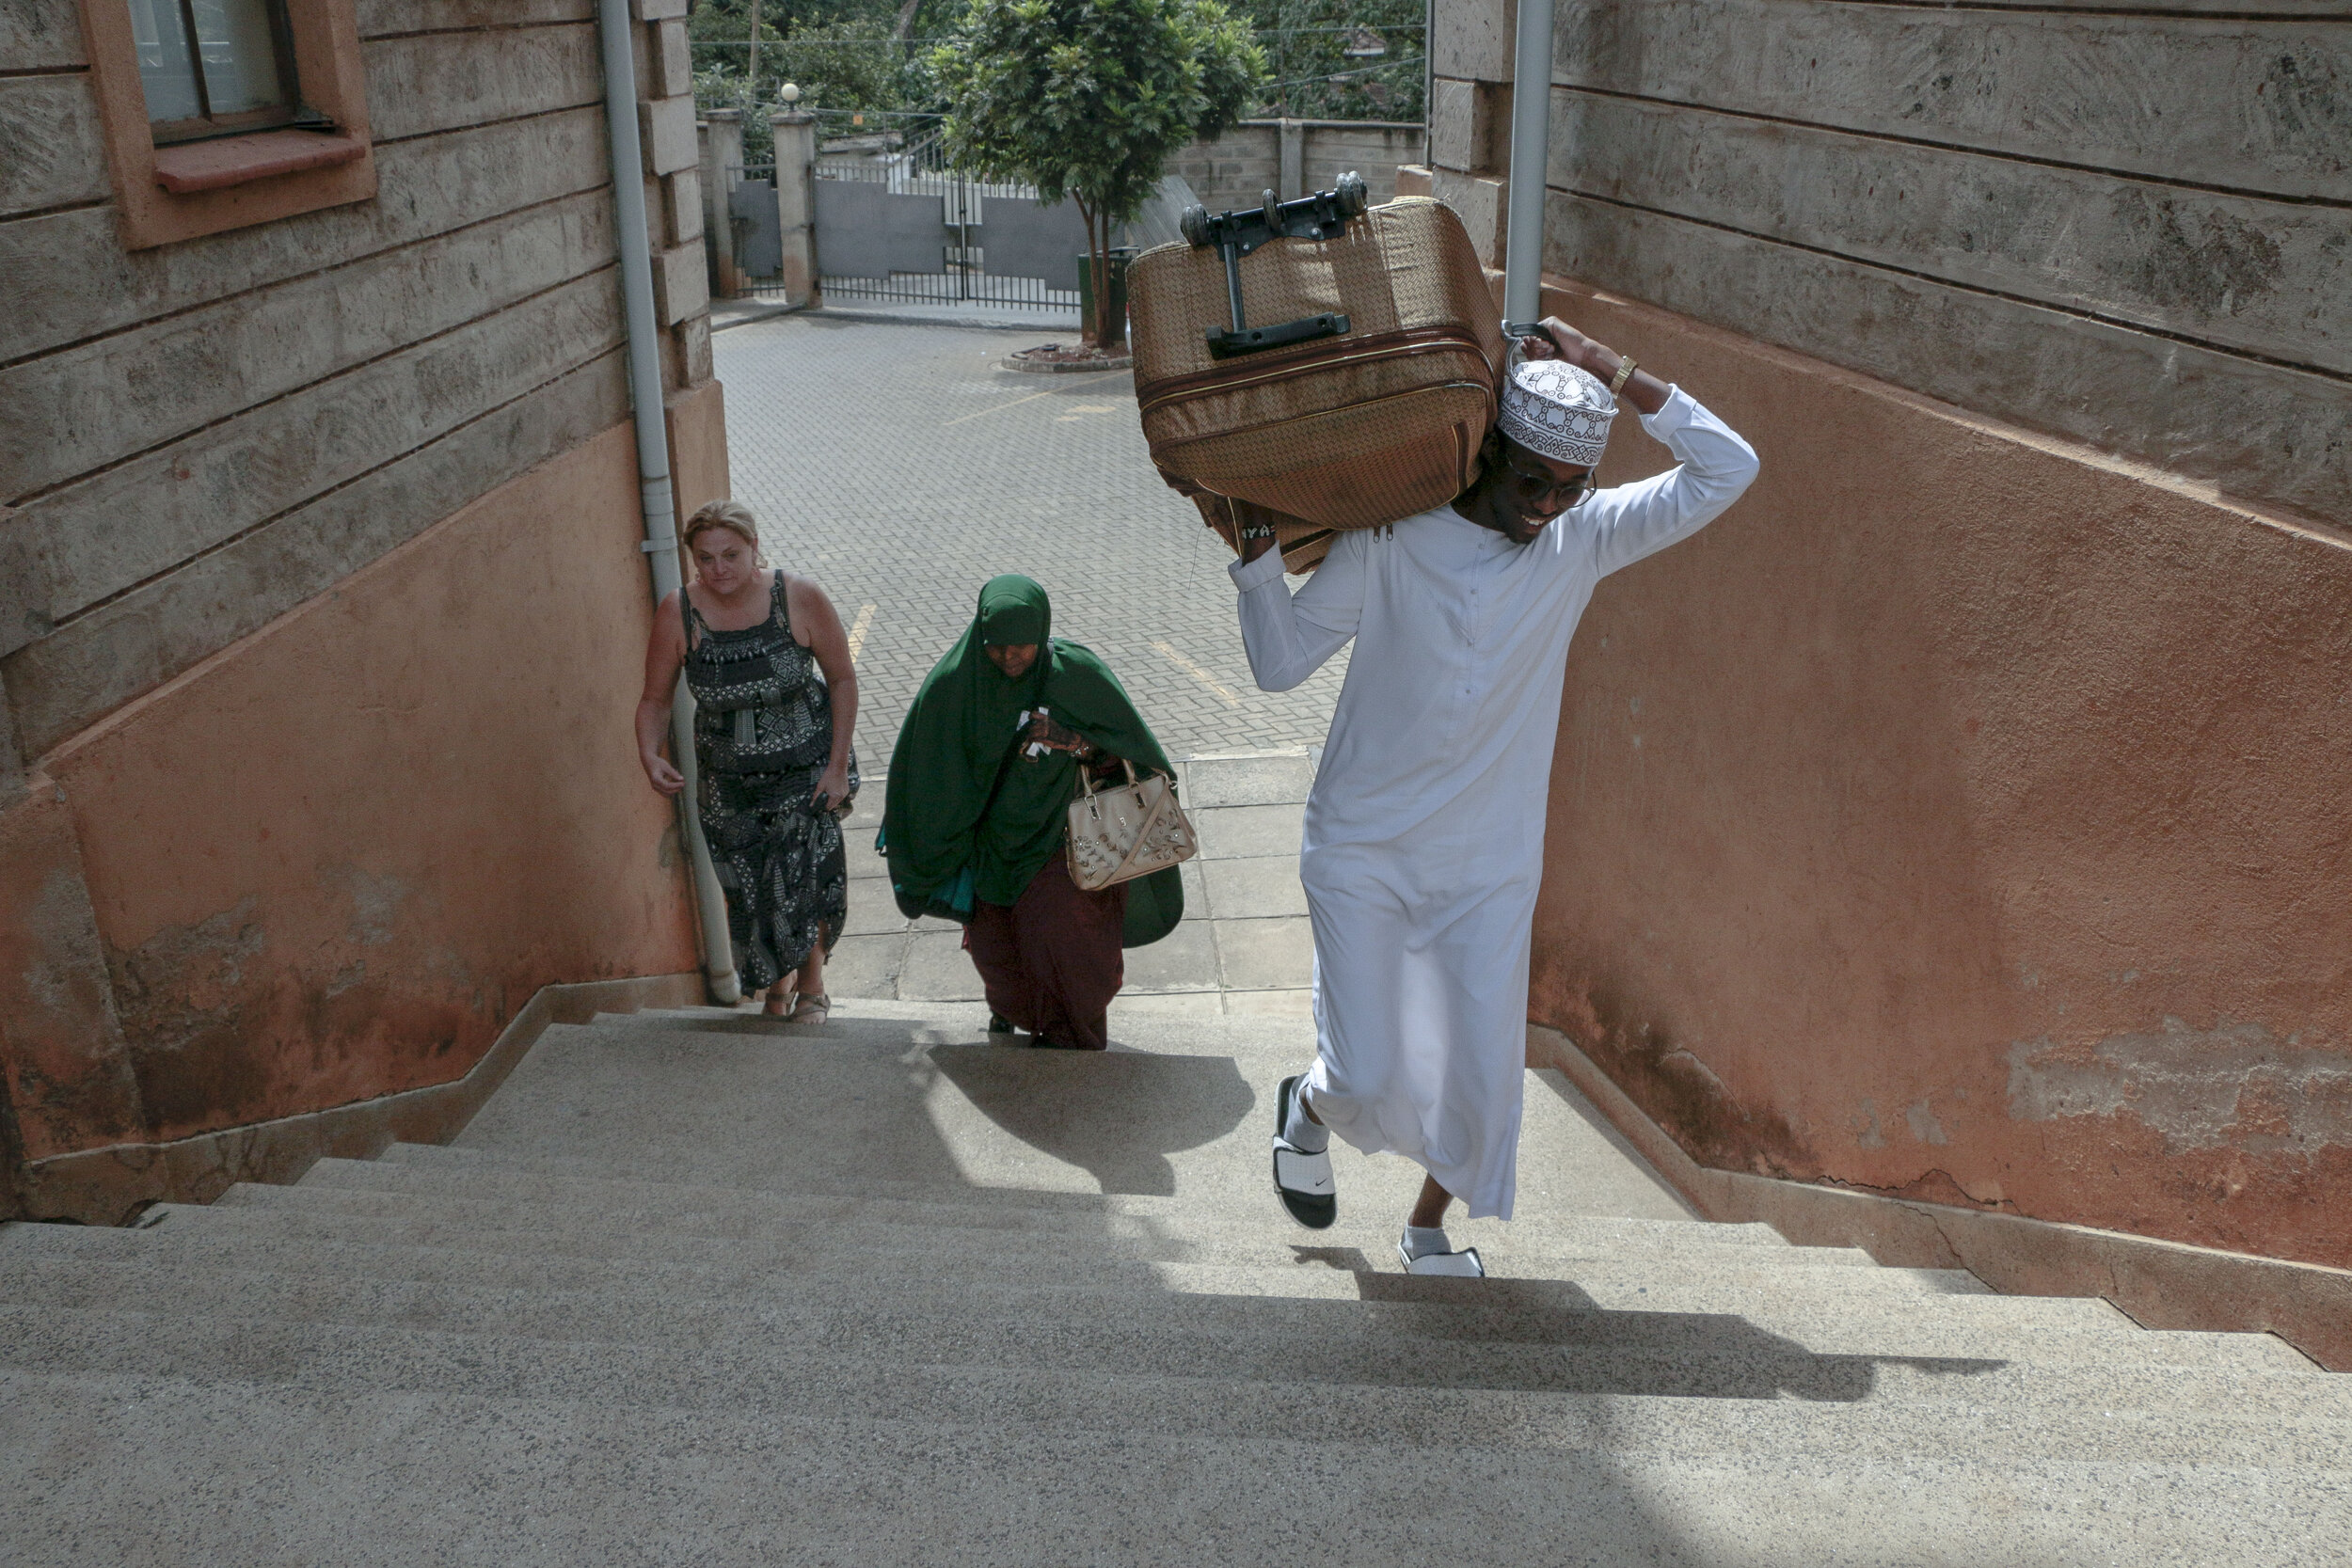  Khalid Ahmed, Kosar's cousin, helps lift a suitcase up the steps while Hamdi Kosar and Jessica Rohloff follow Aug. 23, 2019 in Nairobi. Kosar had met Ahmed just several days before and has many family members that she has never met after being reset